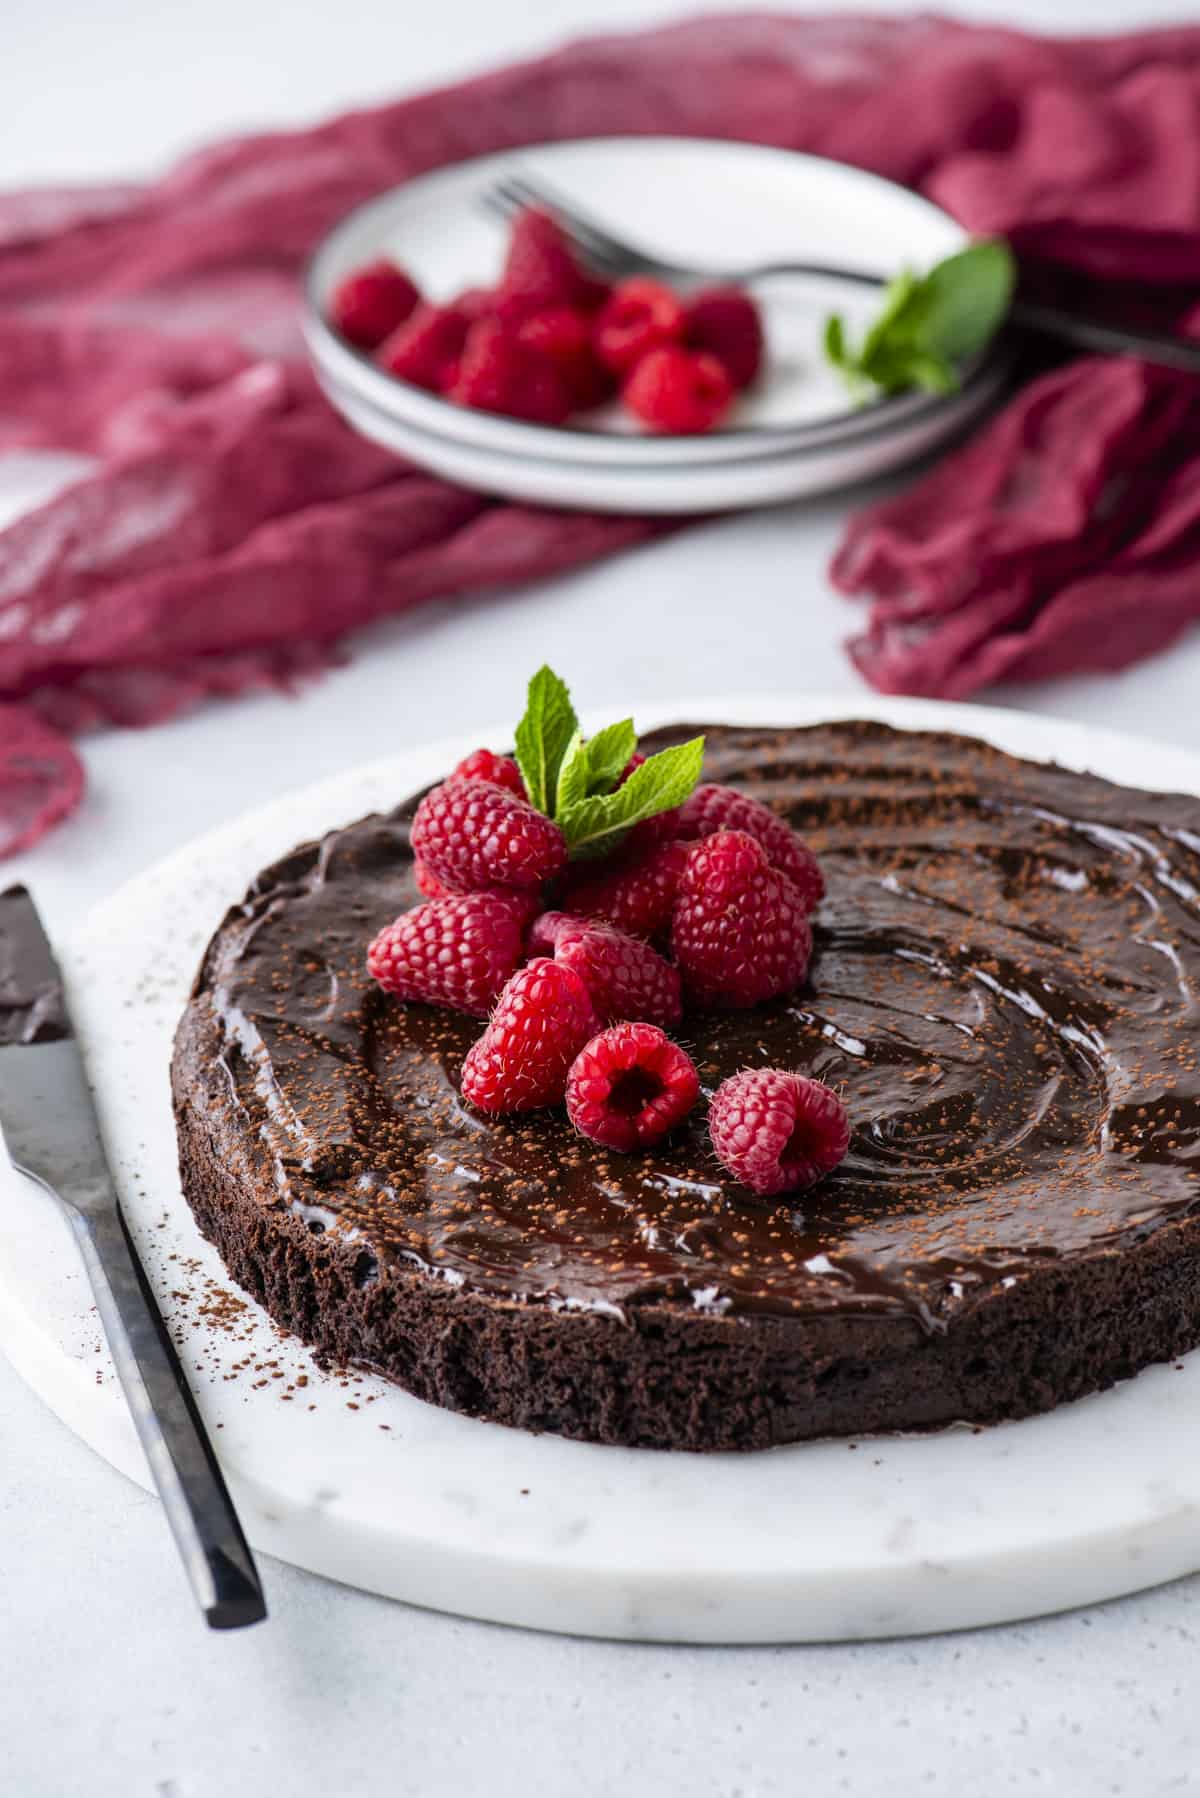 a flourless chocolate cake on a round white serving platter topped with fresh raspberries and mint leaves, with a knife covered in chocolate laying beside it, a red cloth and a bowl of fresh raspberries and mint in the background